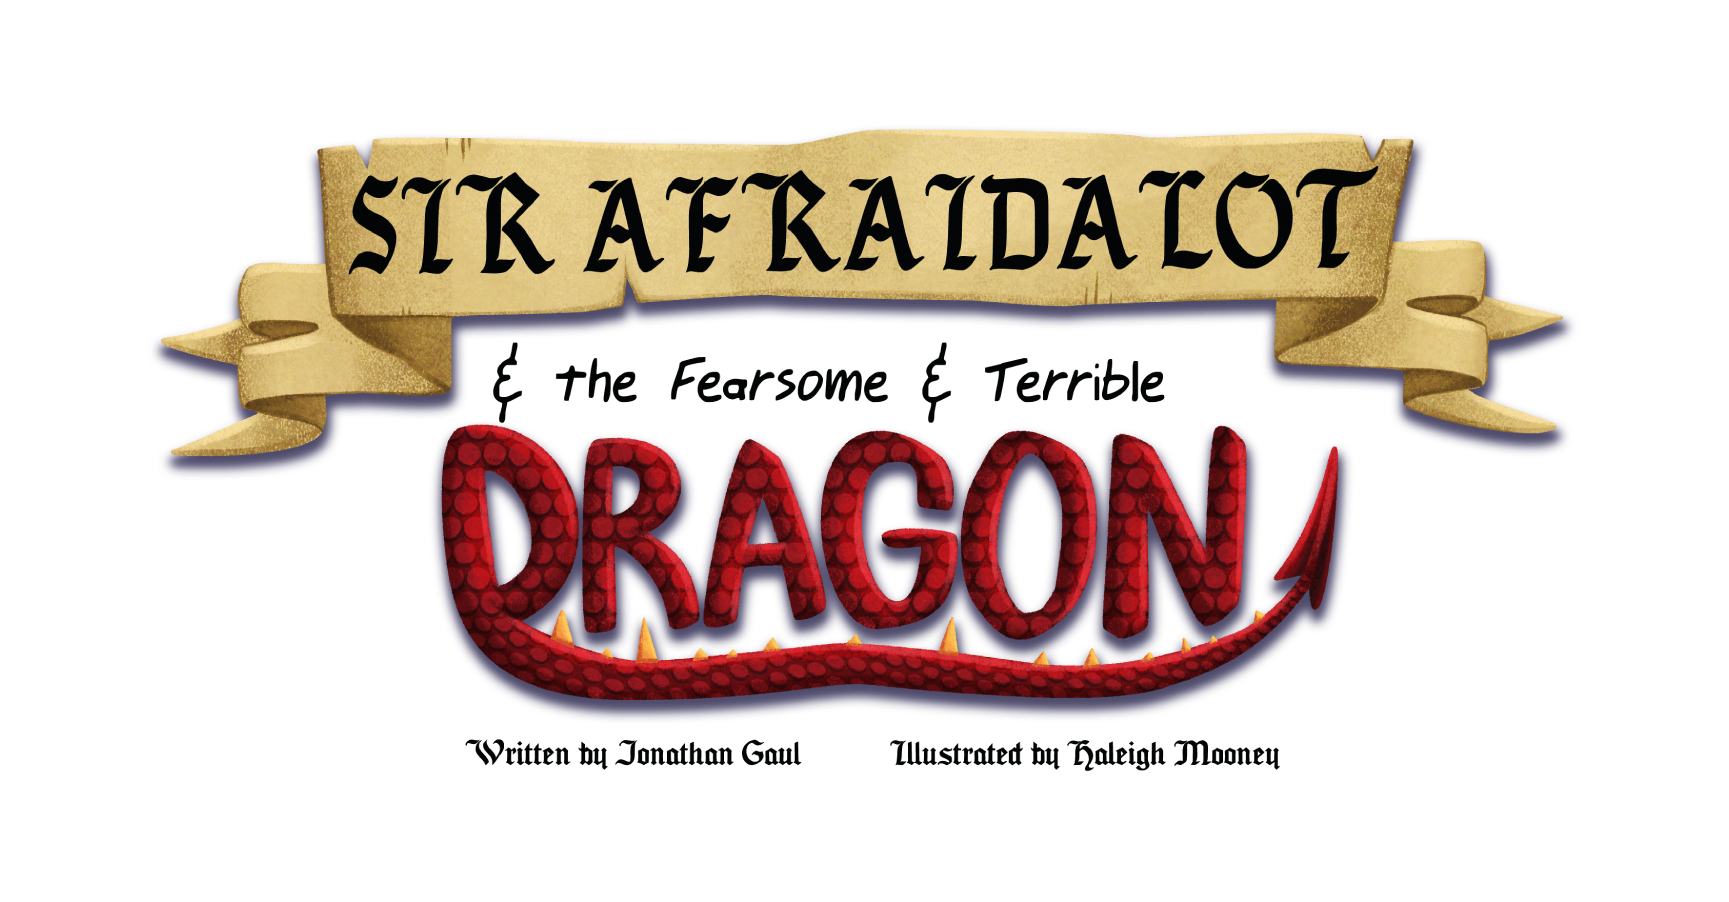 Sir Afraidalot and the Fearsome and Terrible Dragon